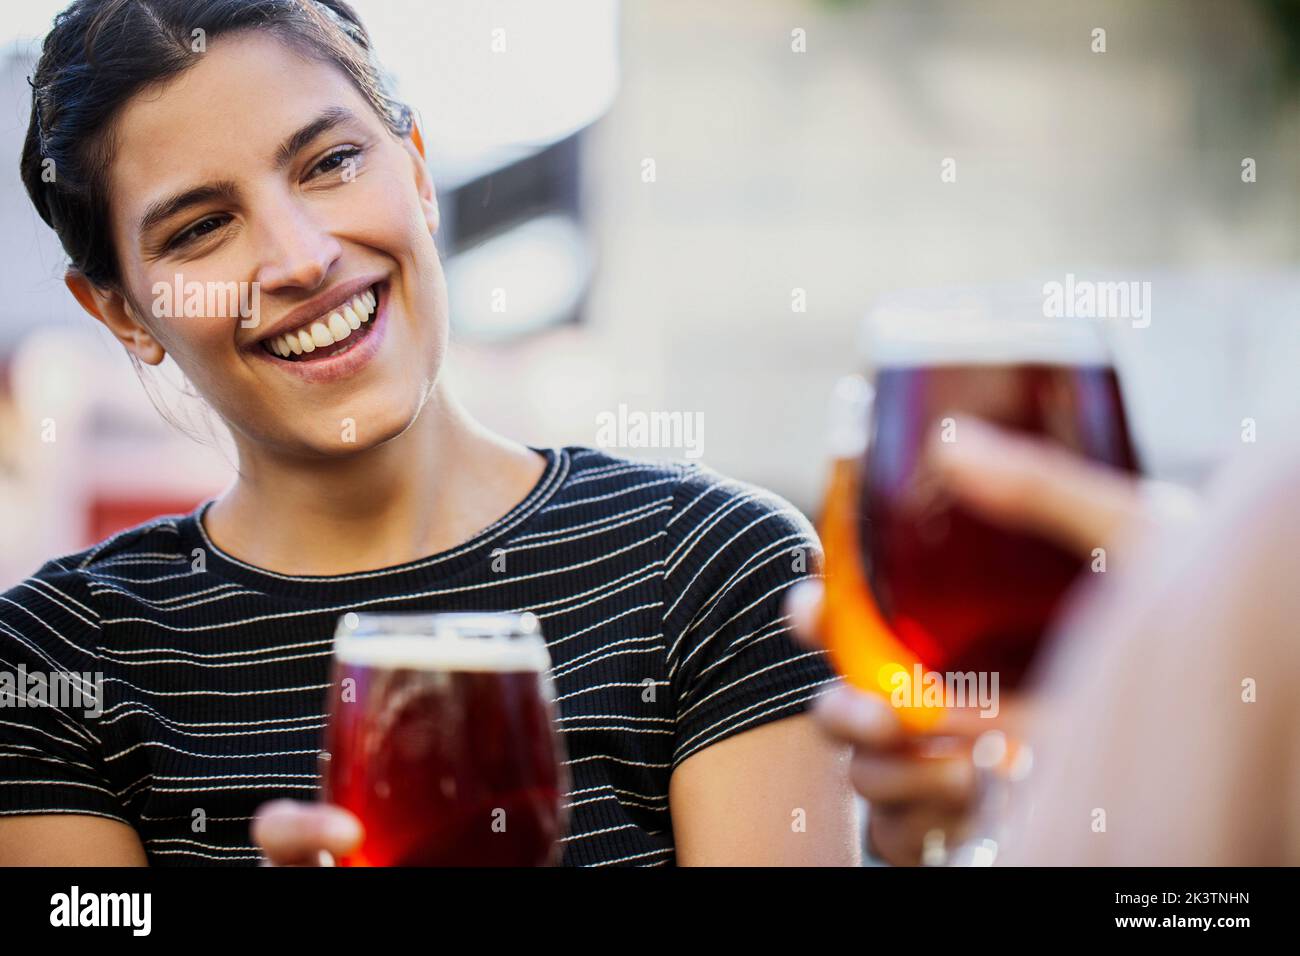 Smiling young adult woman toasting beer cups with friends Stock Photo